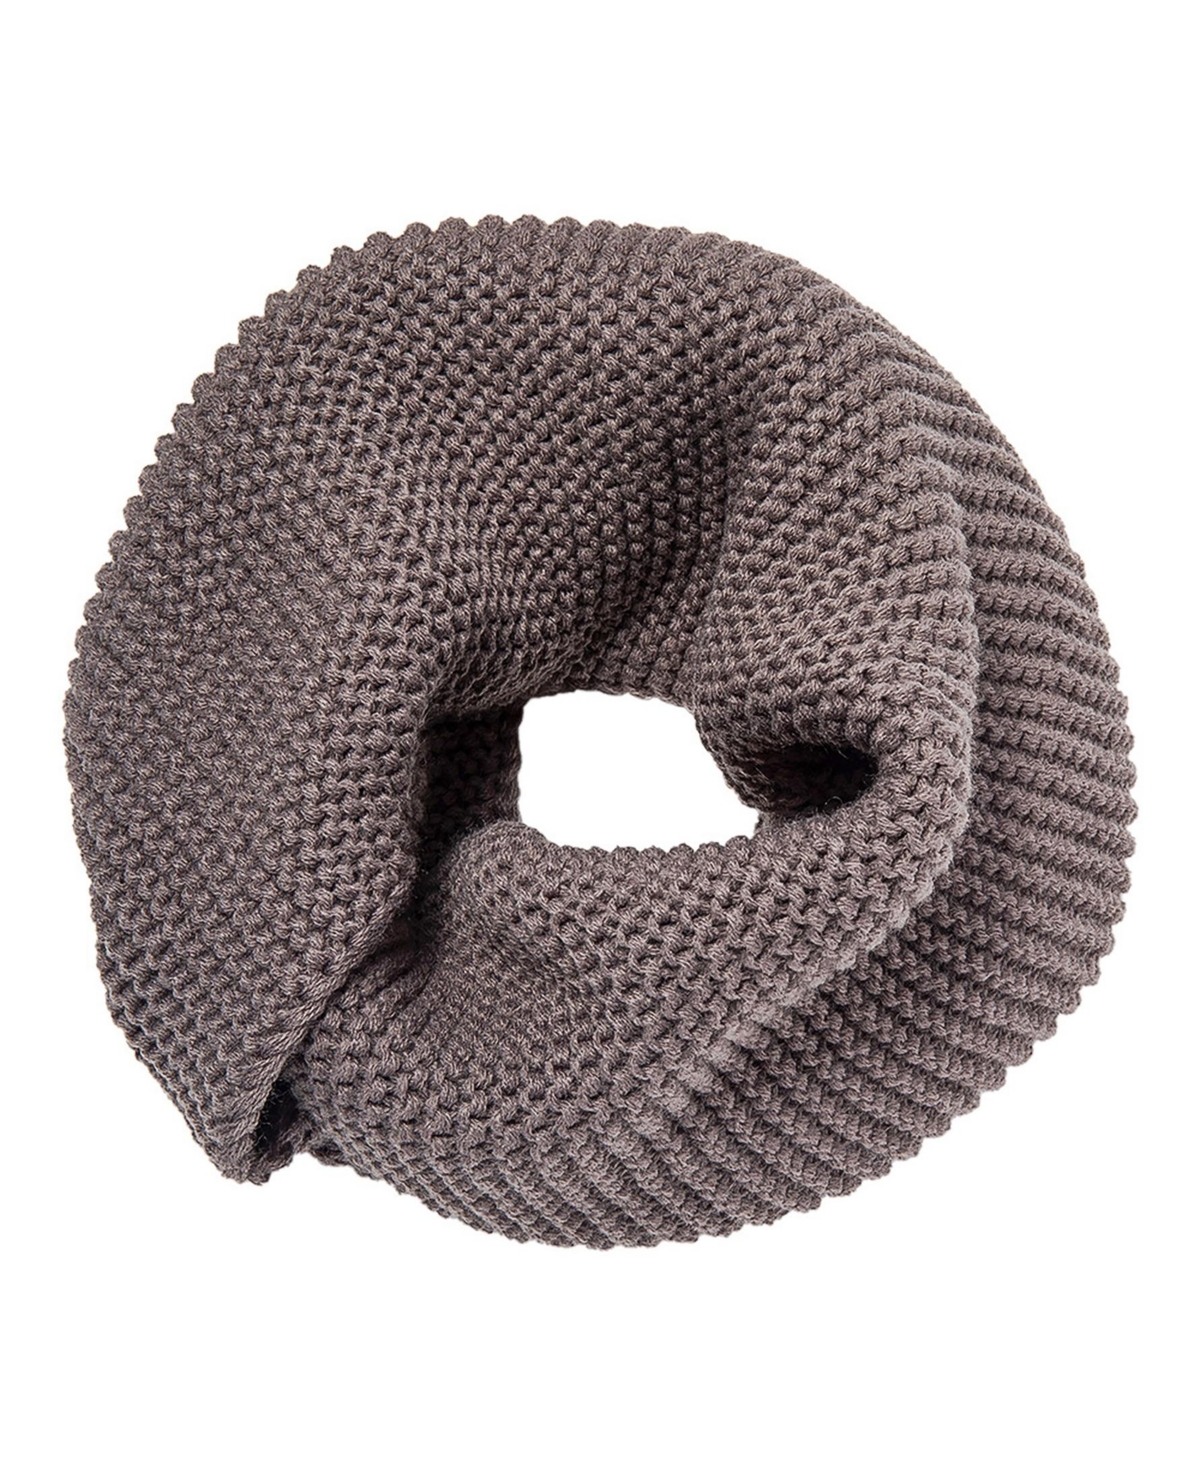 Women's Cable Knit Infinity Circle Scarf - Ash